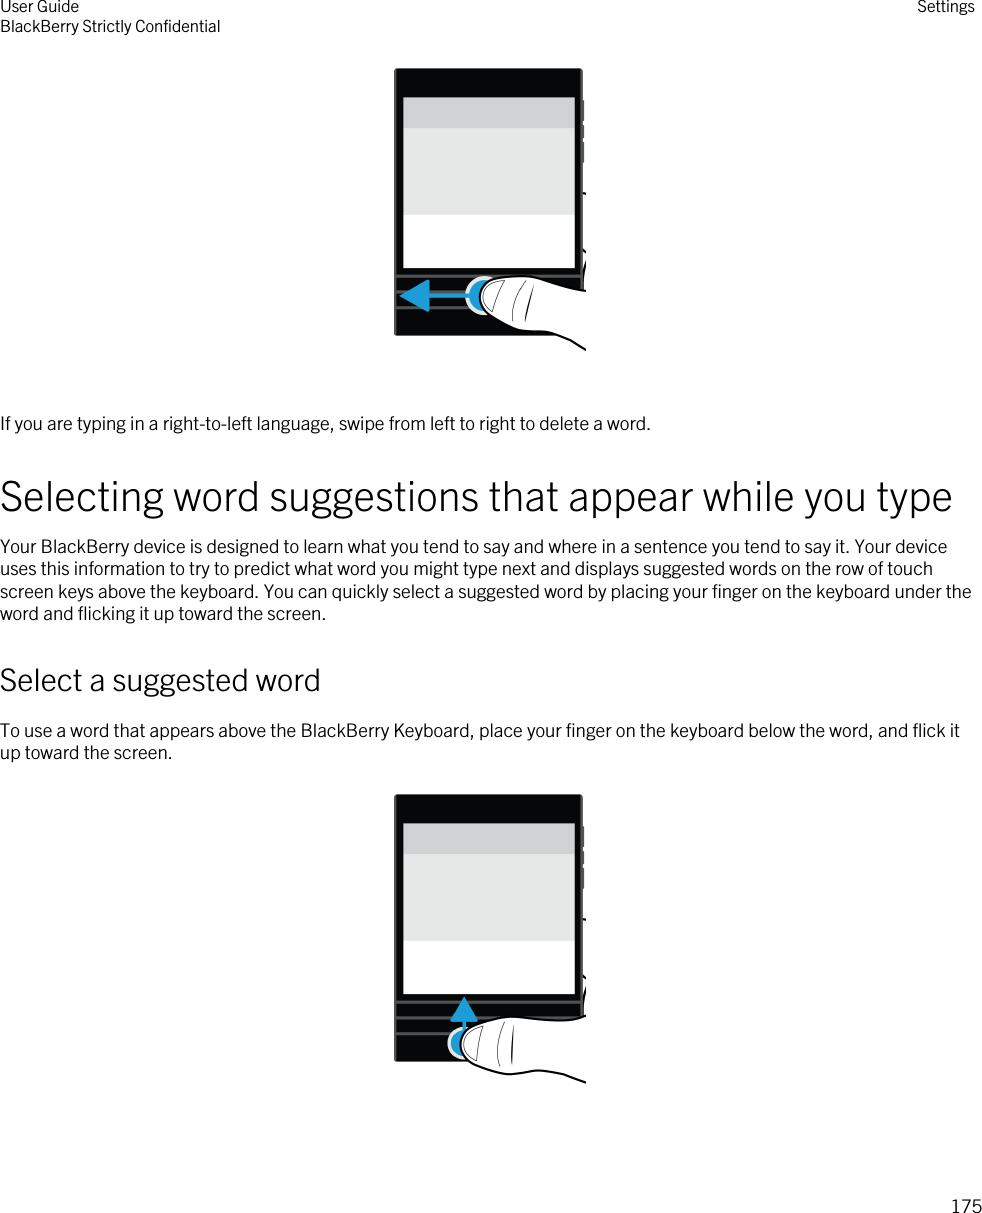  If you are typing in a right-to-left language, swipe from left to right to delete a word.Selecting word suggestions that appear while you typeYour BlackBerry device is designed to learn what you tend to say and where in a sentence you tend to say it. Your device uses this information to try to predict what word you might type next and displays suggested words on the row of touch screen keys above the keyboard. You can quickly select a suggested word by placing your finger on the keyboard under the word and flicking it up toward the screen.Select a suggested wordTo use a word that appears above the BlackBerry Keyboard, place your finger on the keyboard below the word, and flick it up toward the screen.  User GuideBlackBerry Strictly Confidential Settings175